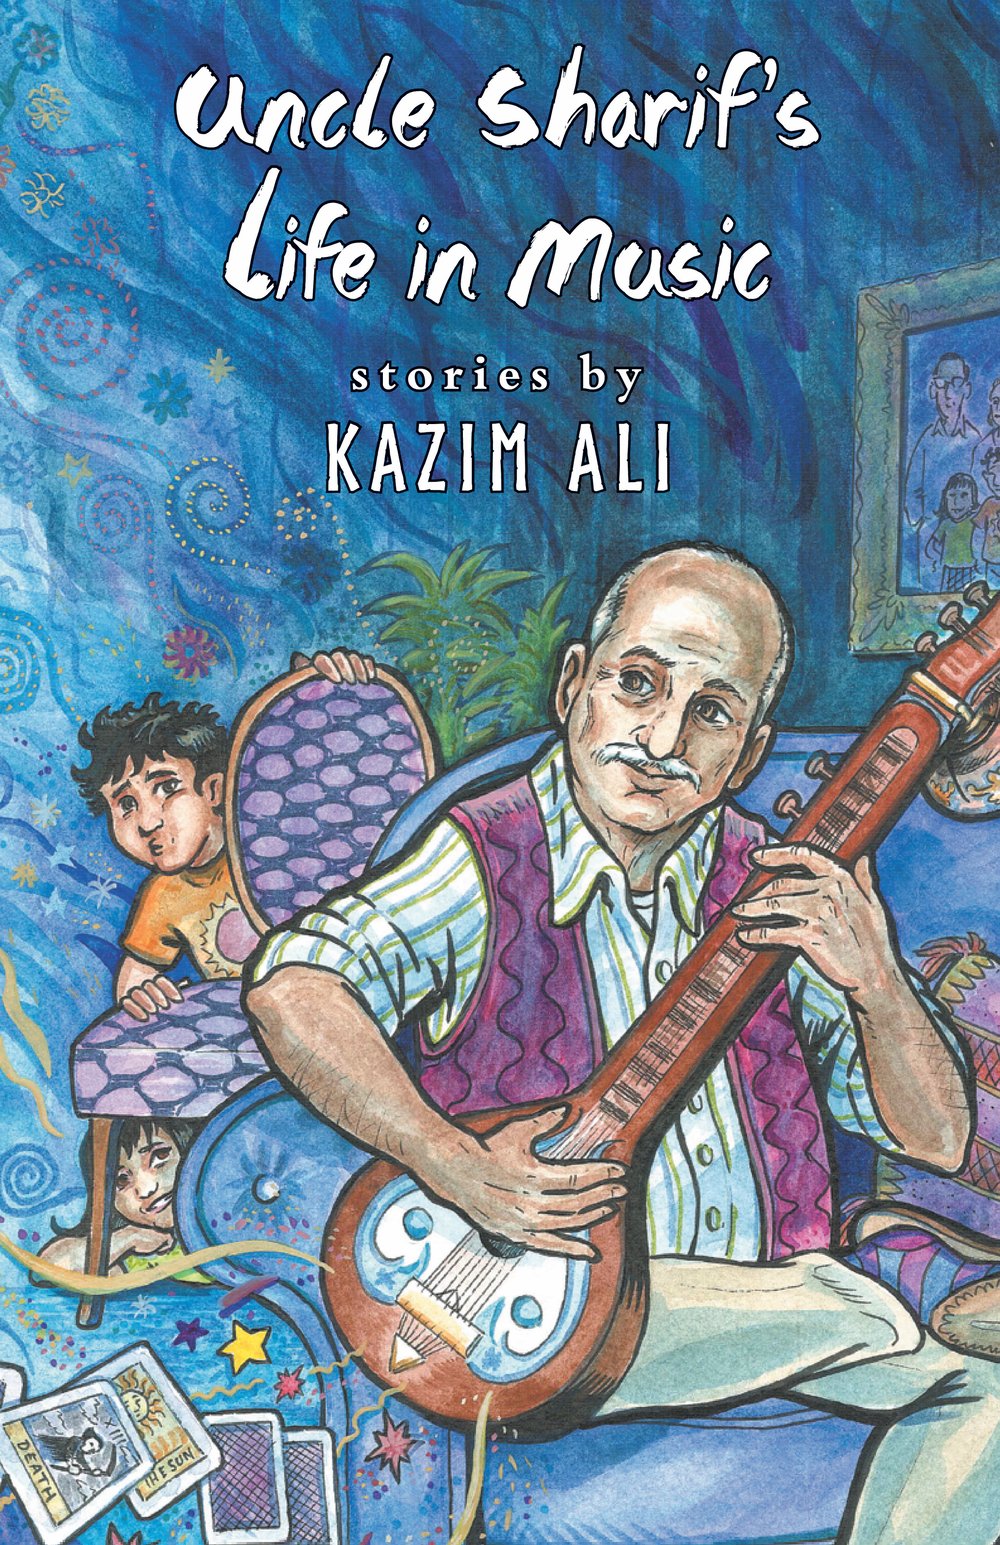 Uncle Sharif's Life in Music by Kazim Ali